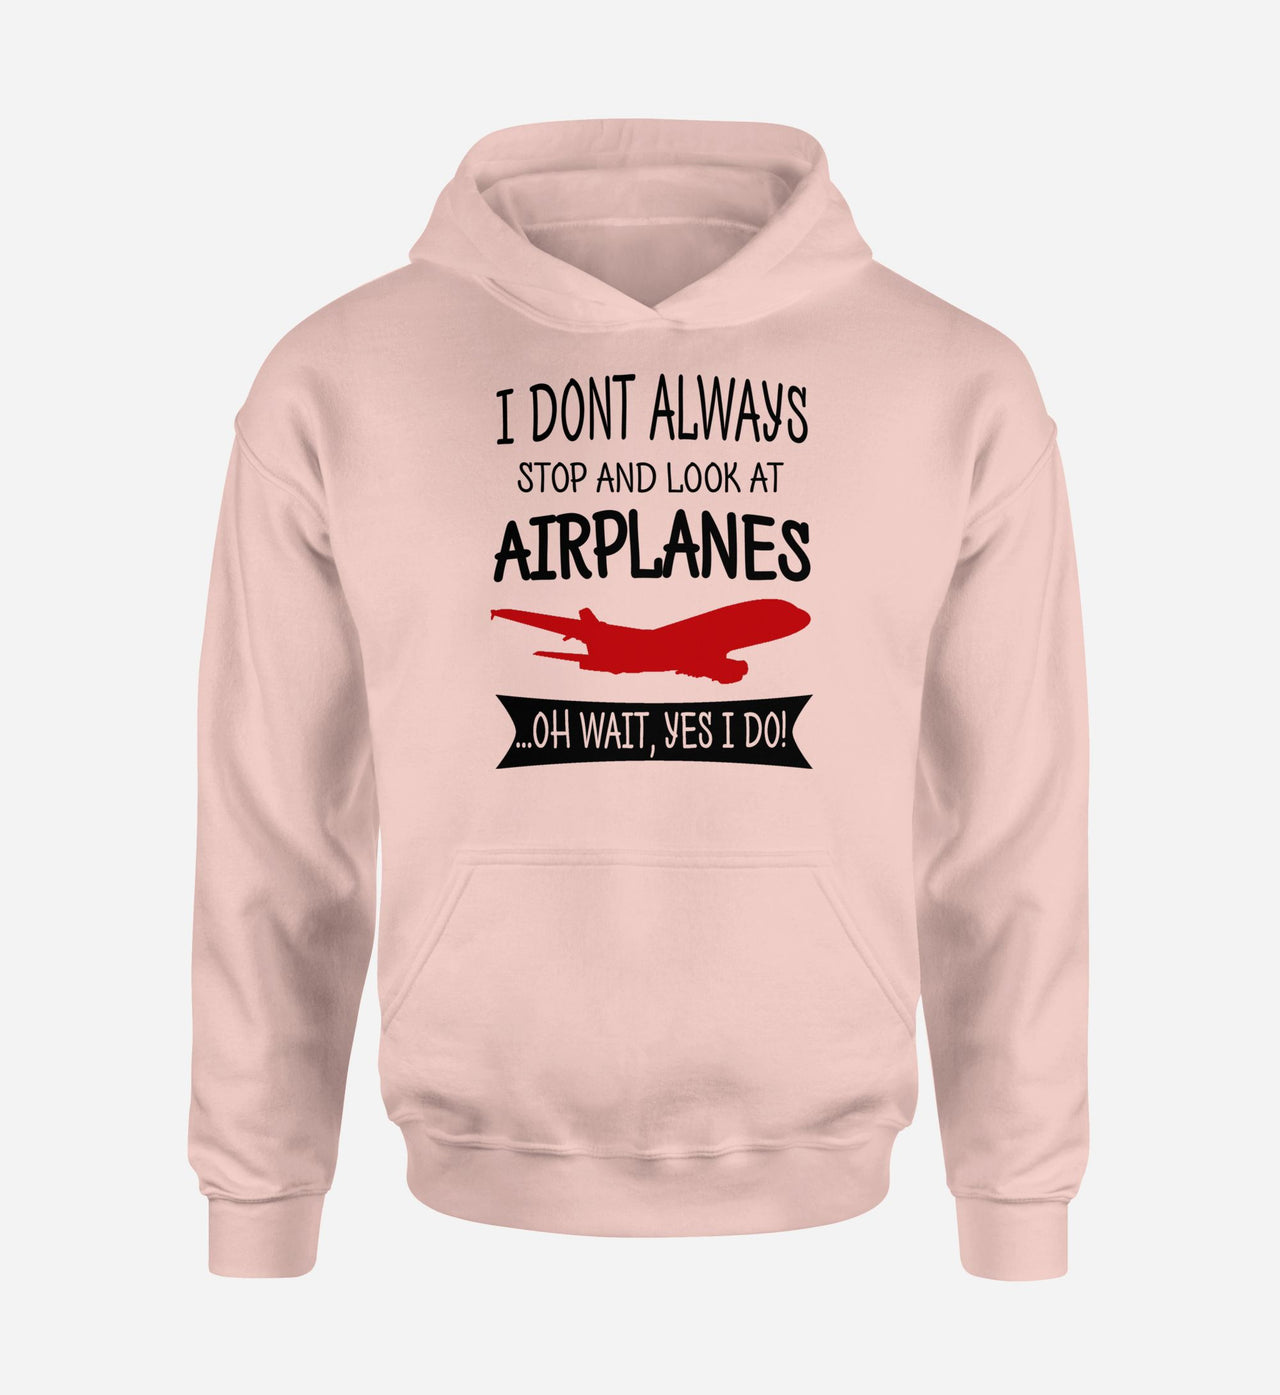 I Don't Always Stop and Look at Airplanes Designed Hoodies